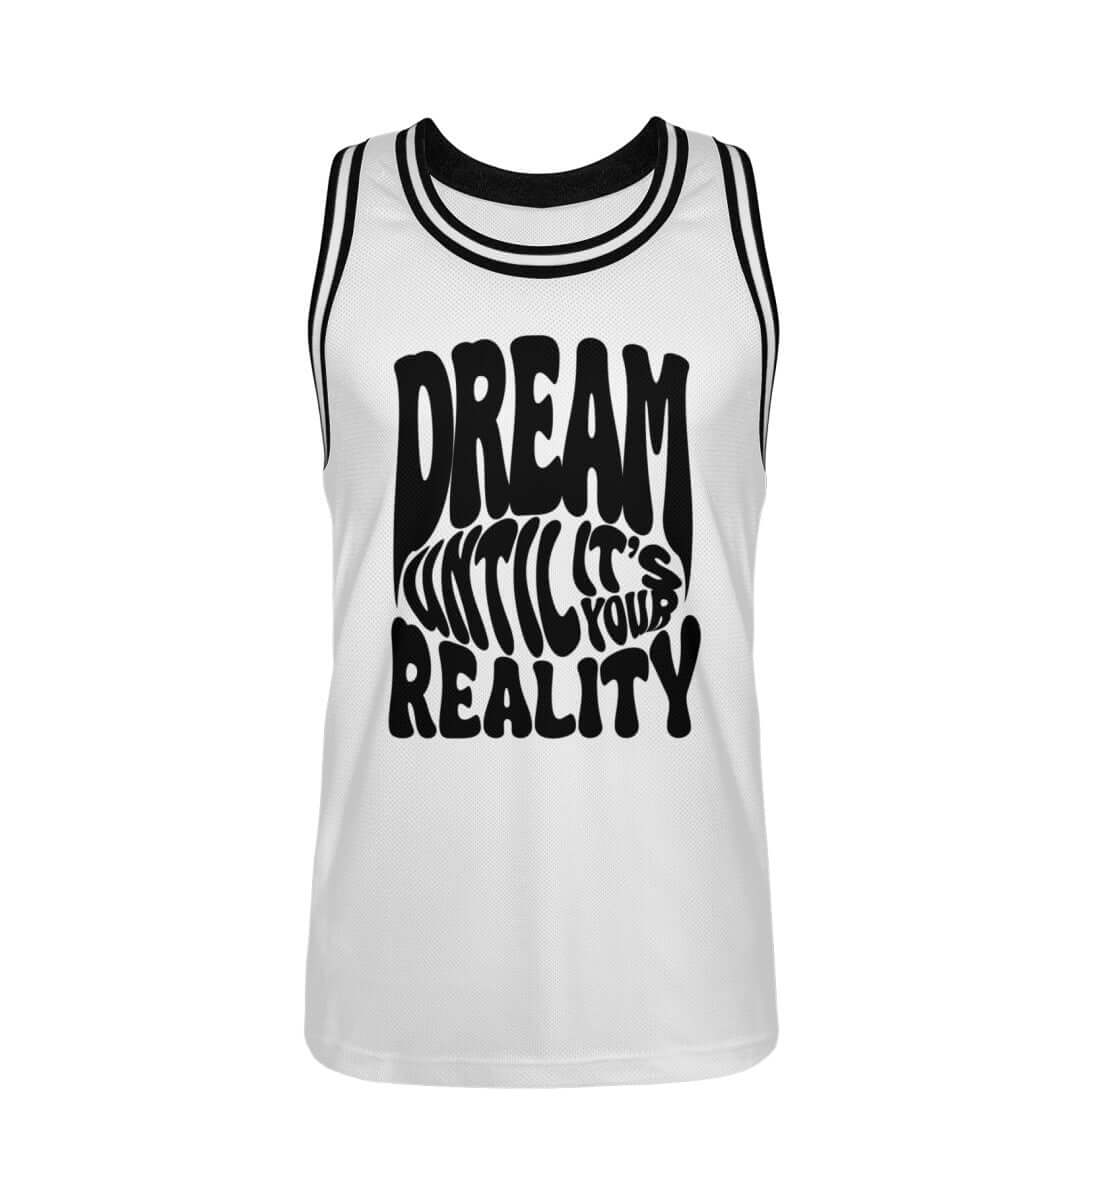 'DREAM UNTIL IT'S YOUR REALITY' - Unisex Basketball Trikot - GODVIBES